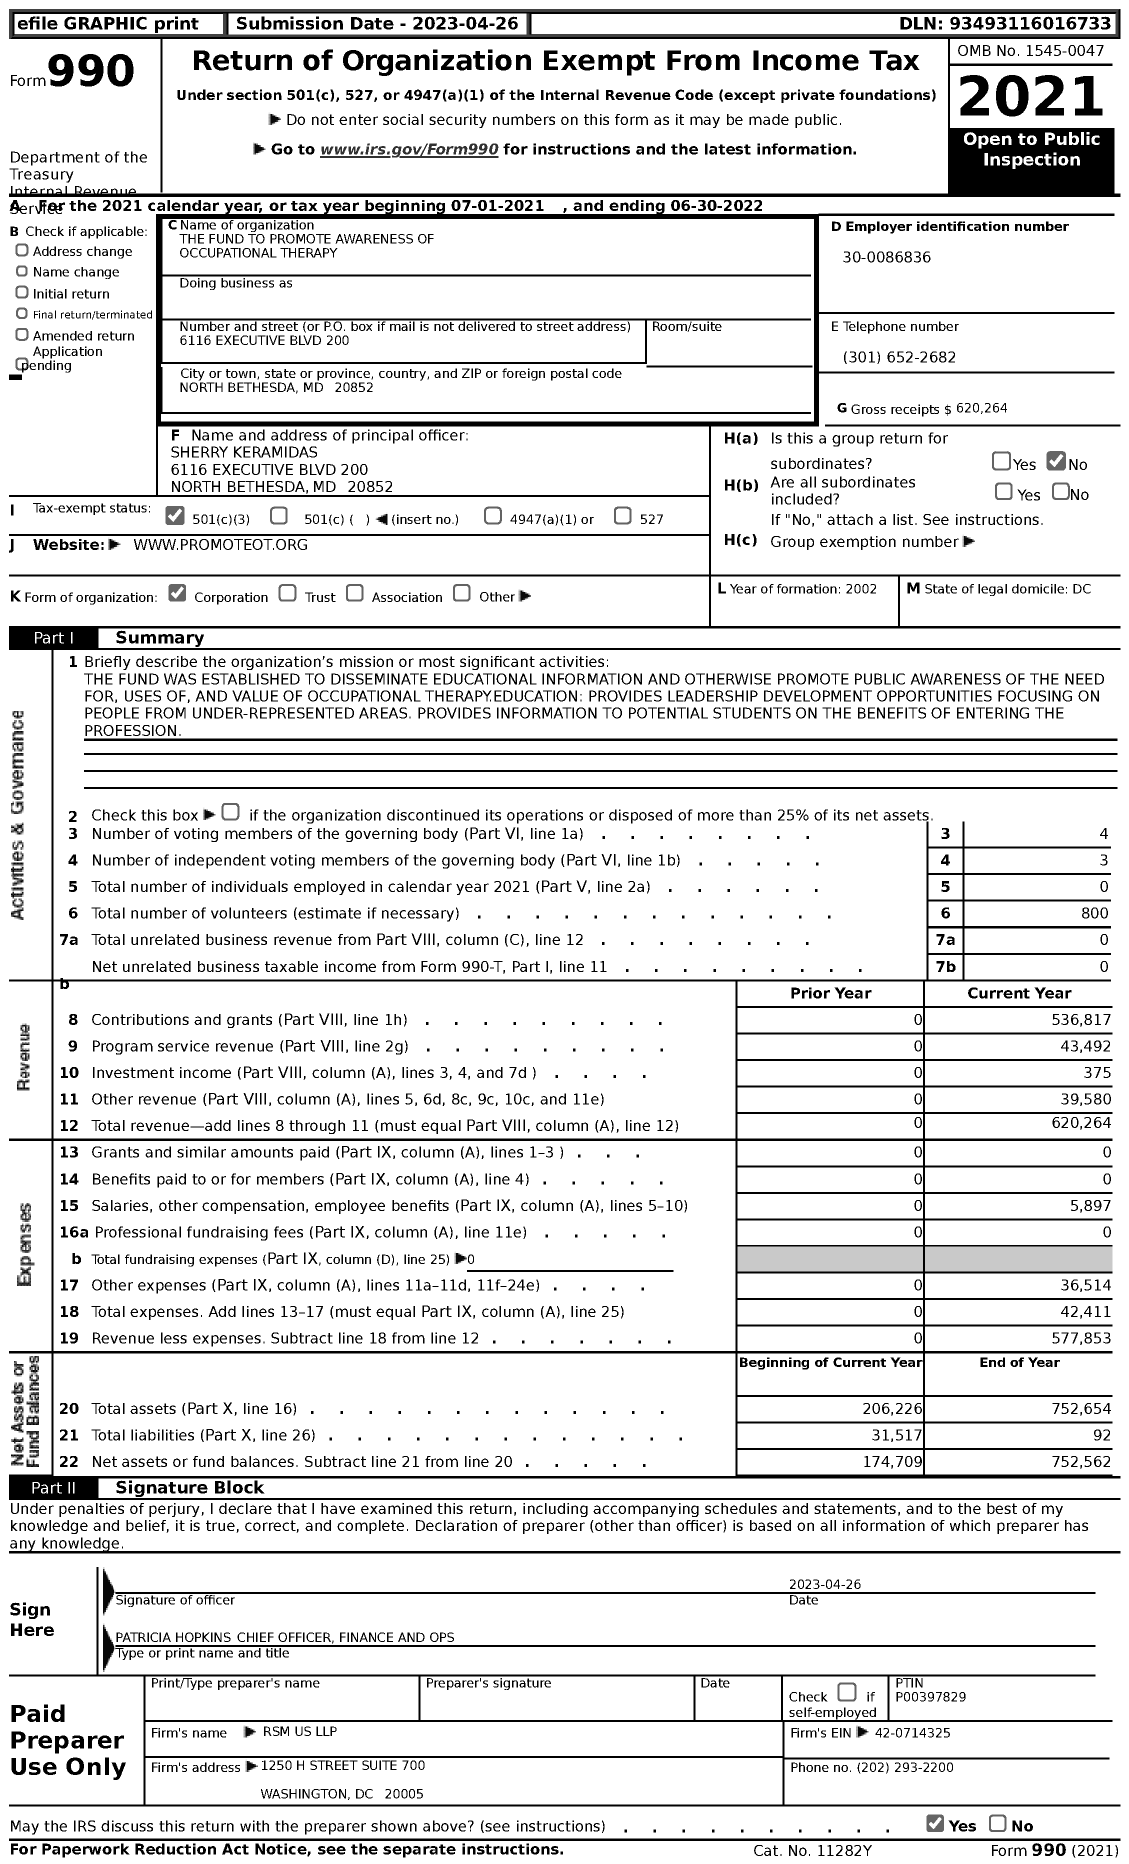 Image of first page of 2021 Form 990 for The Fund To Promote Awareness of Occupational Therapy